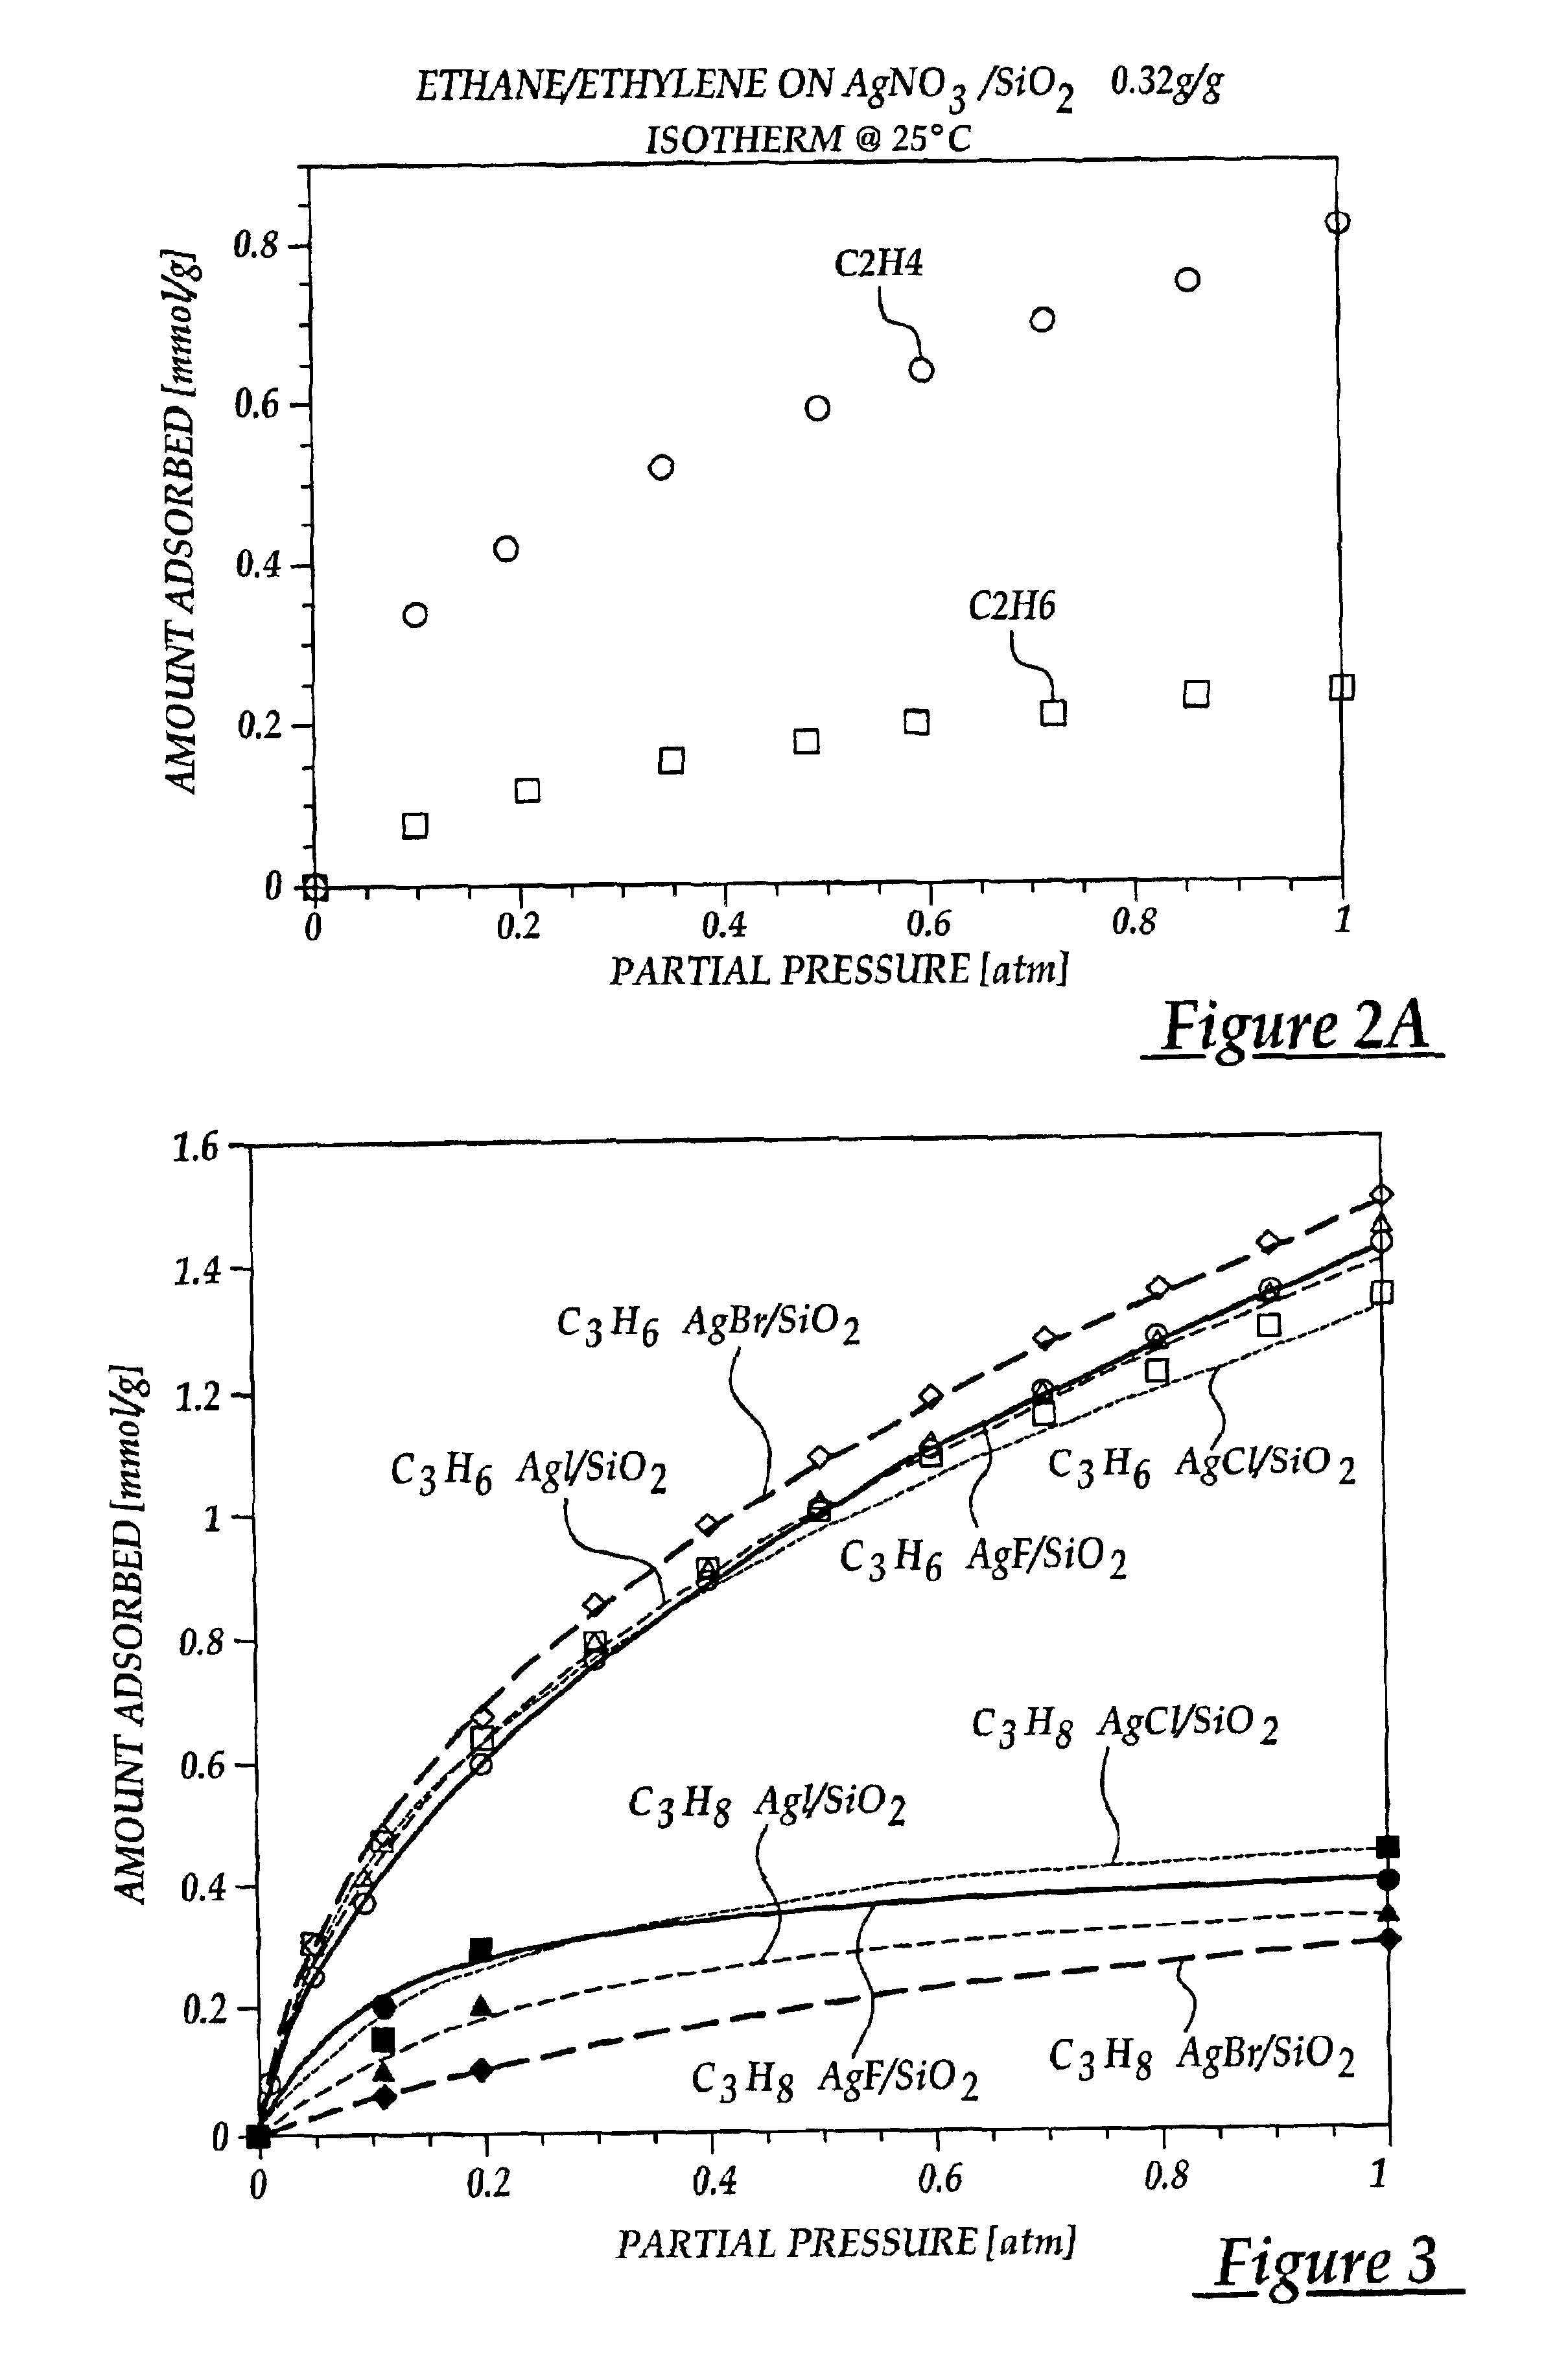 Selective adsorption of alkenes using supported metal compounds